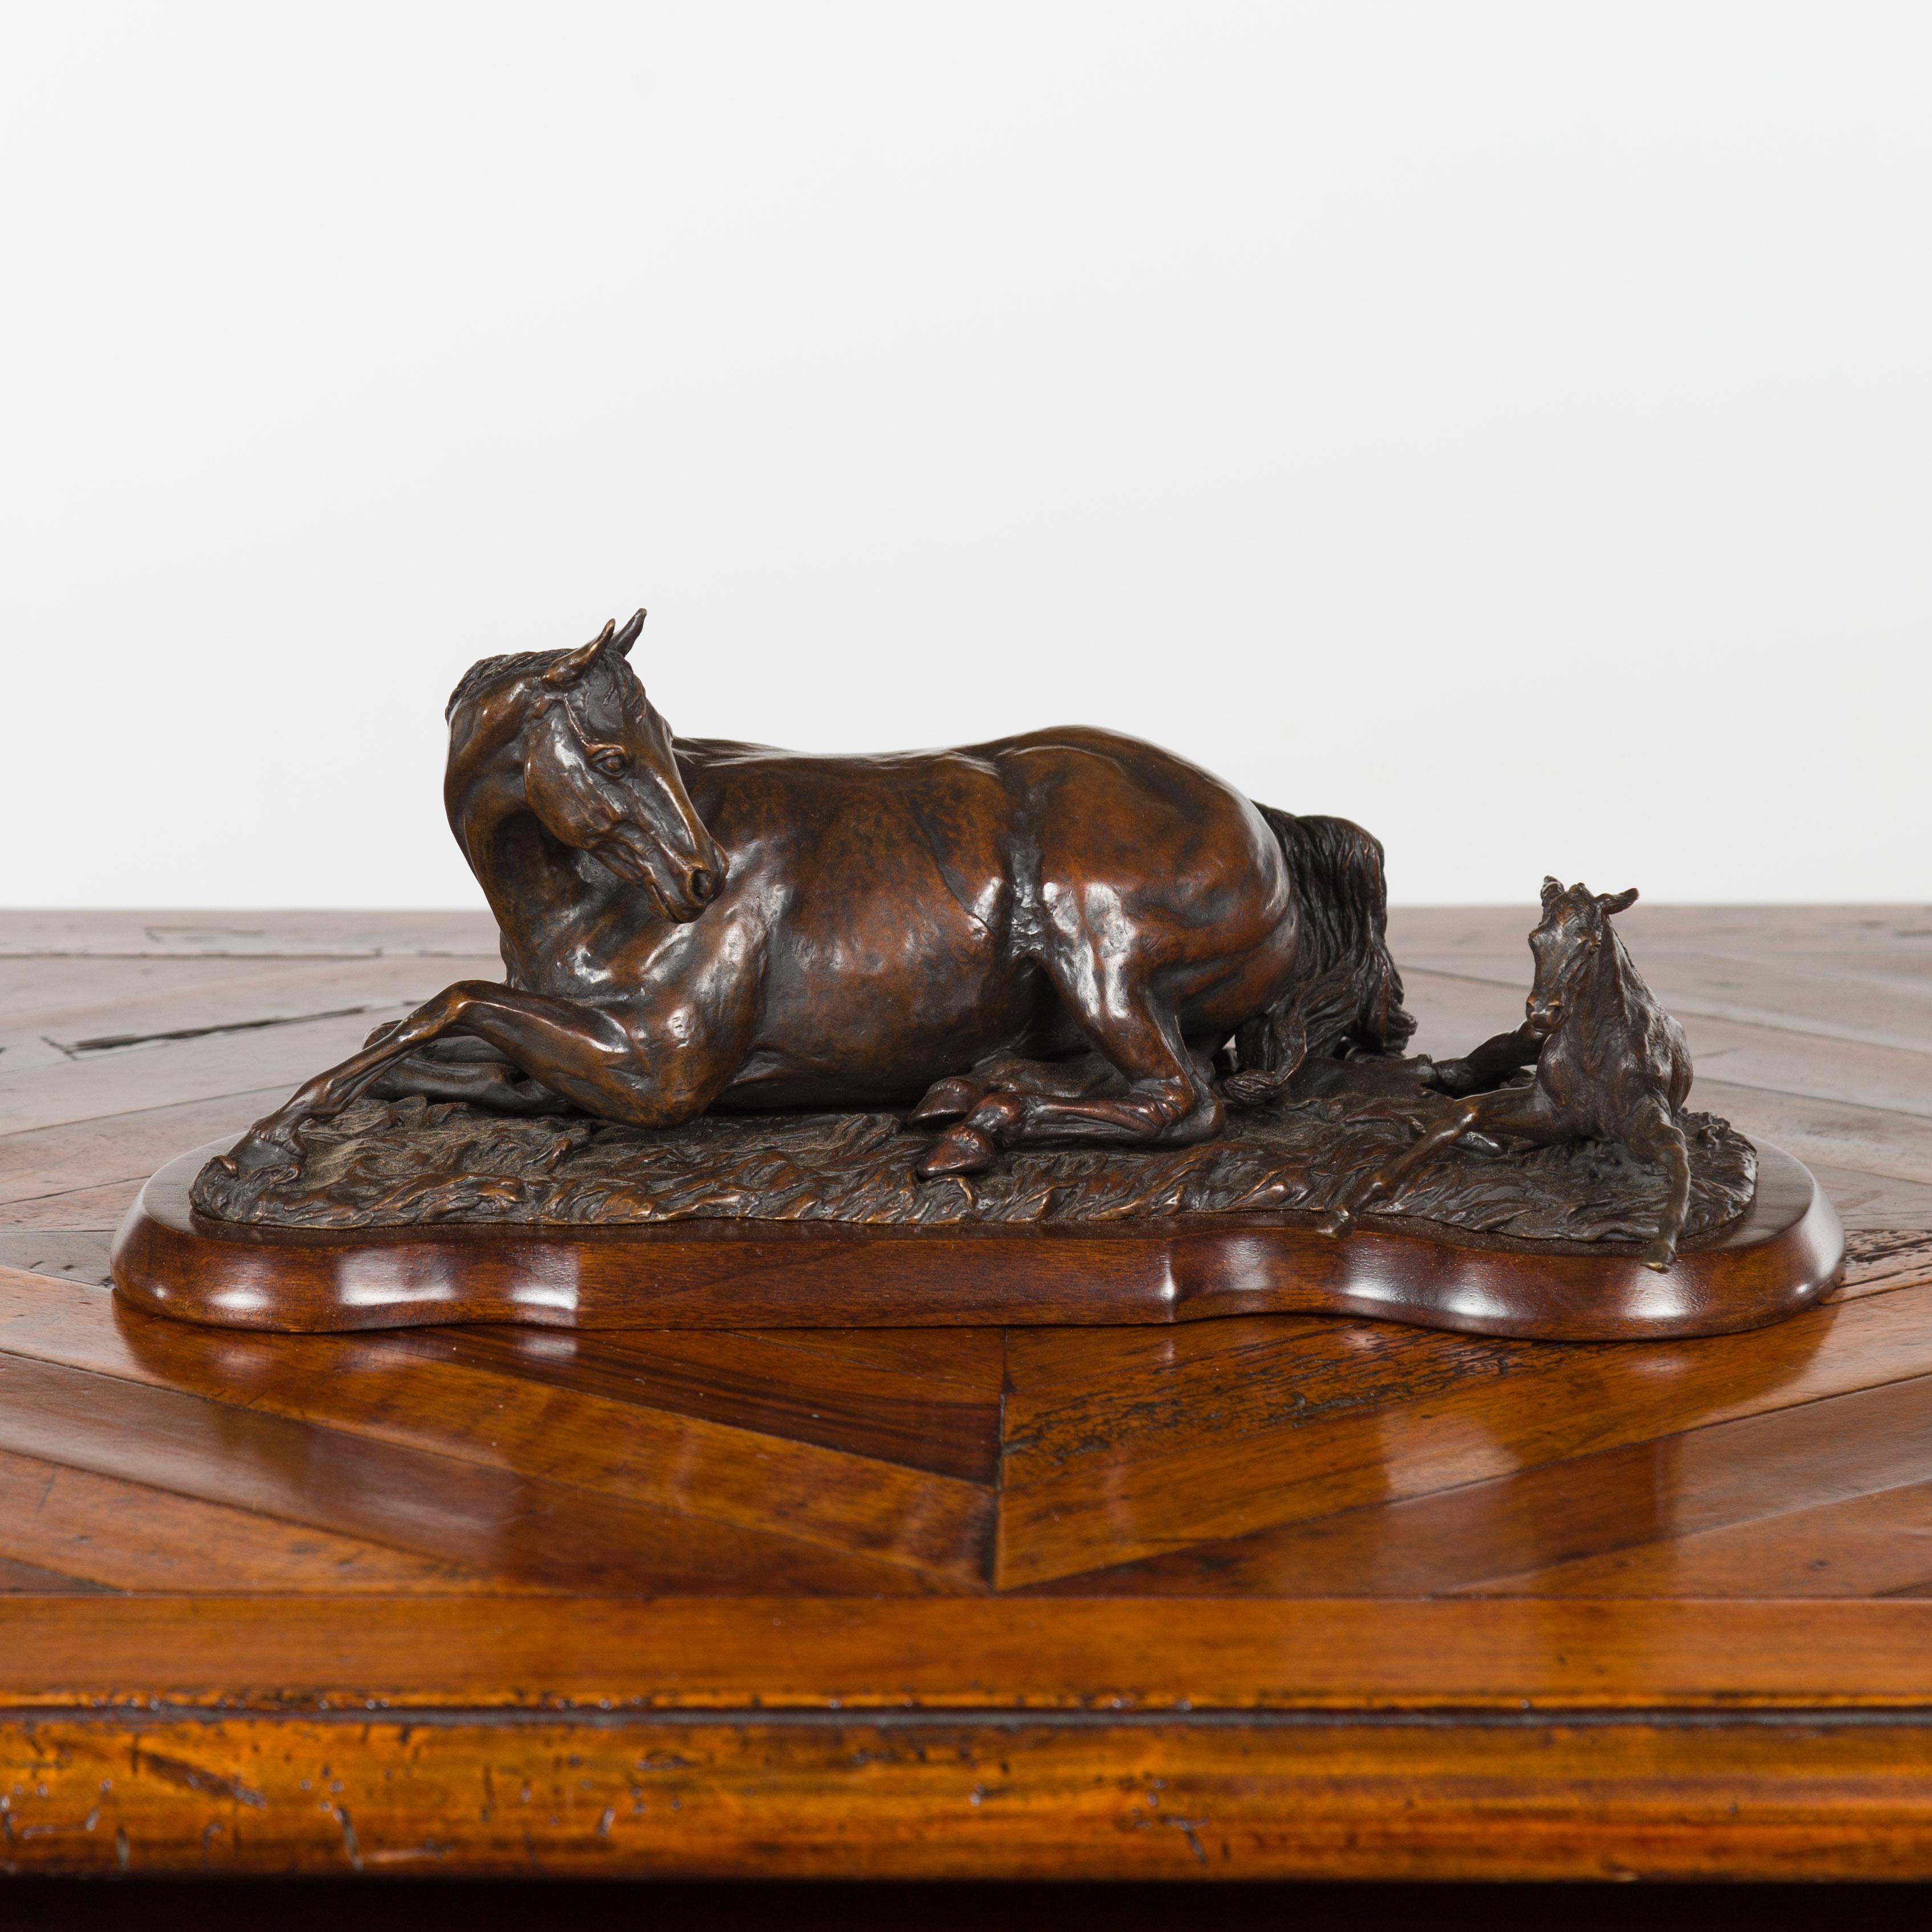 A cast bronze sculpture signed and dated Suzanne Fiedler 1974, depicting a horse and foal on wooden base. Cast by American artist Suzanne Fiedler in 1974, this bronze sculpture touches us with its heartwarming depiction of a mare and her foal laying